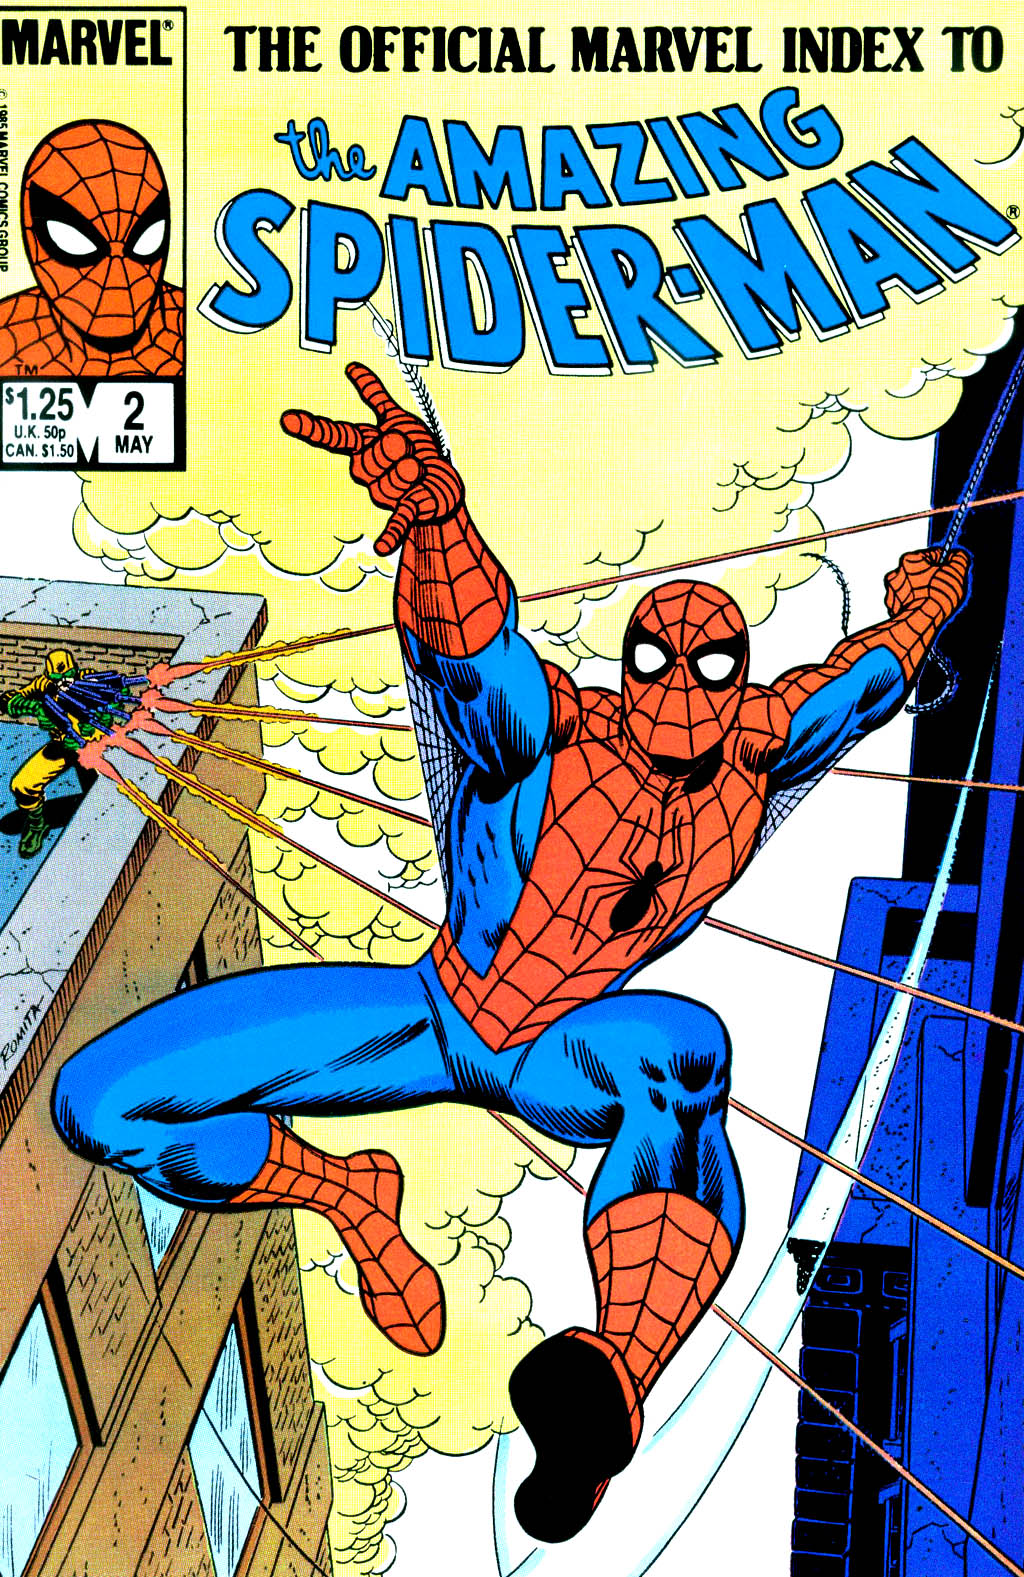 Read online The Official Marvel Index to The Amazing Spider-Man comic -  Issue #2 - 1